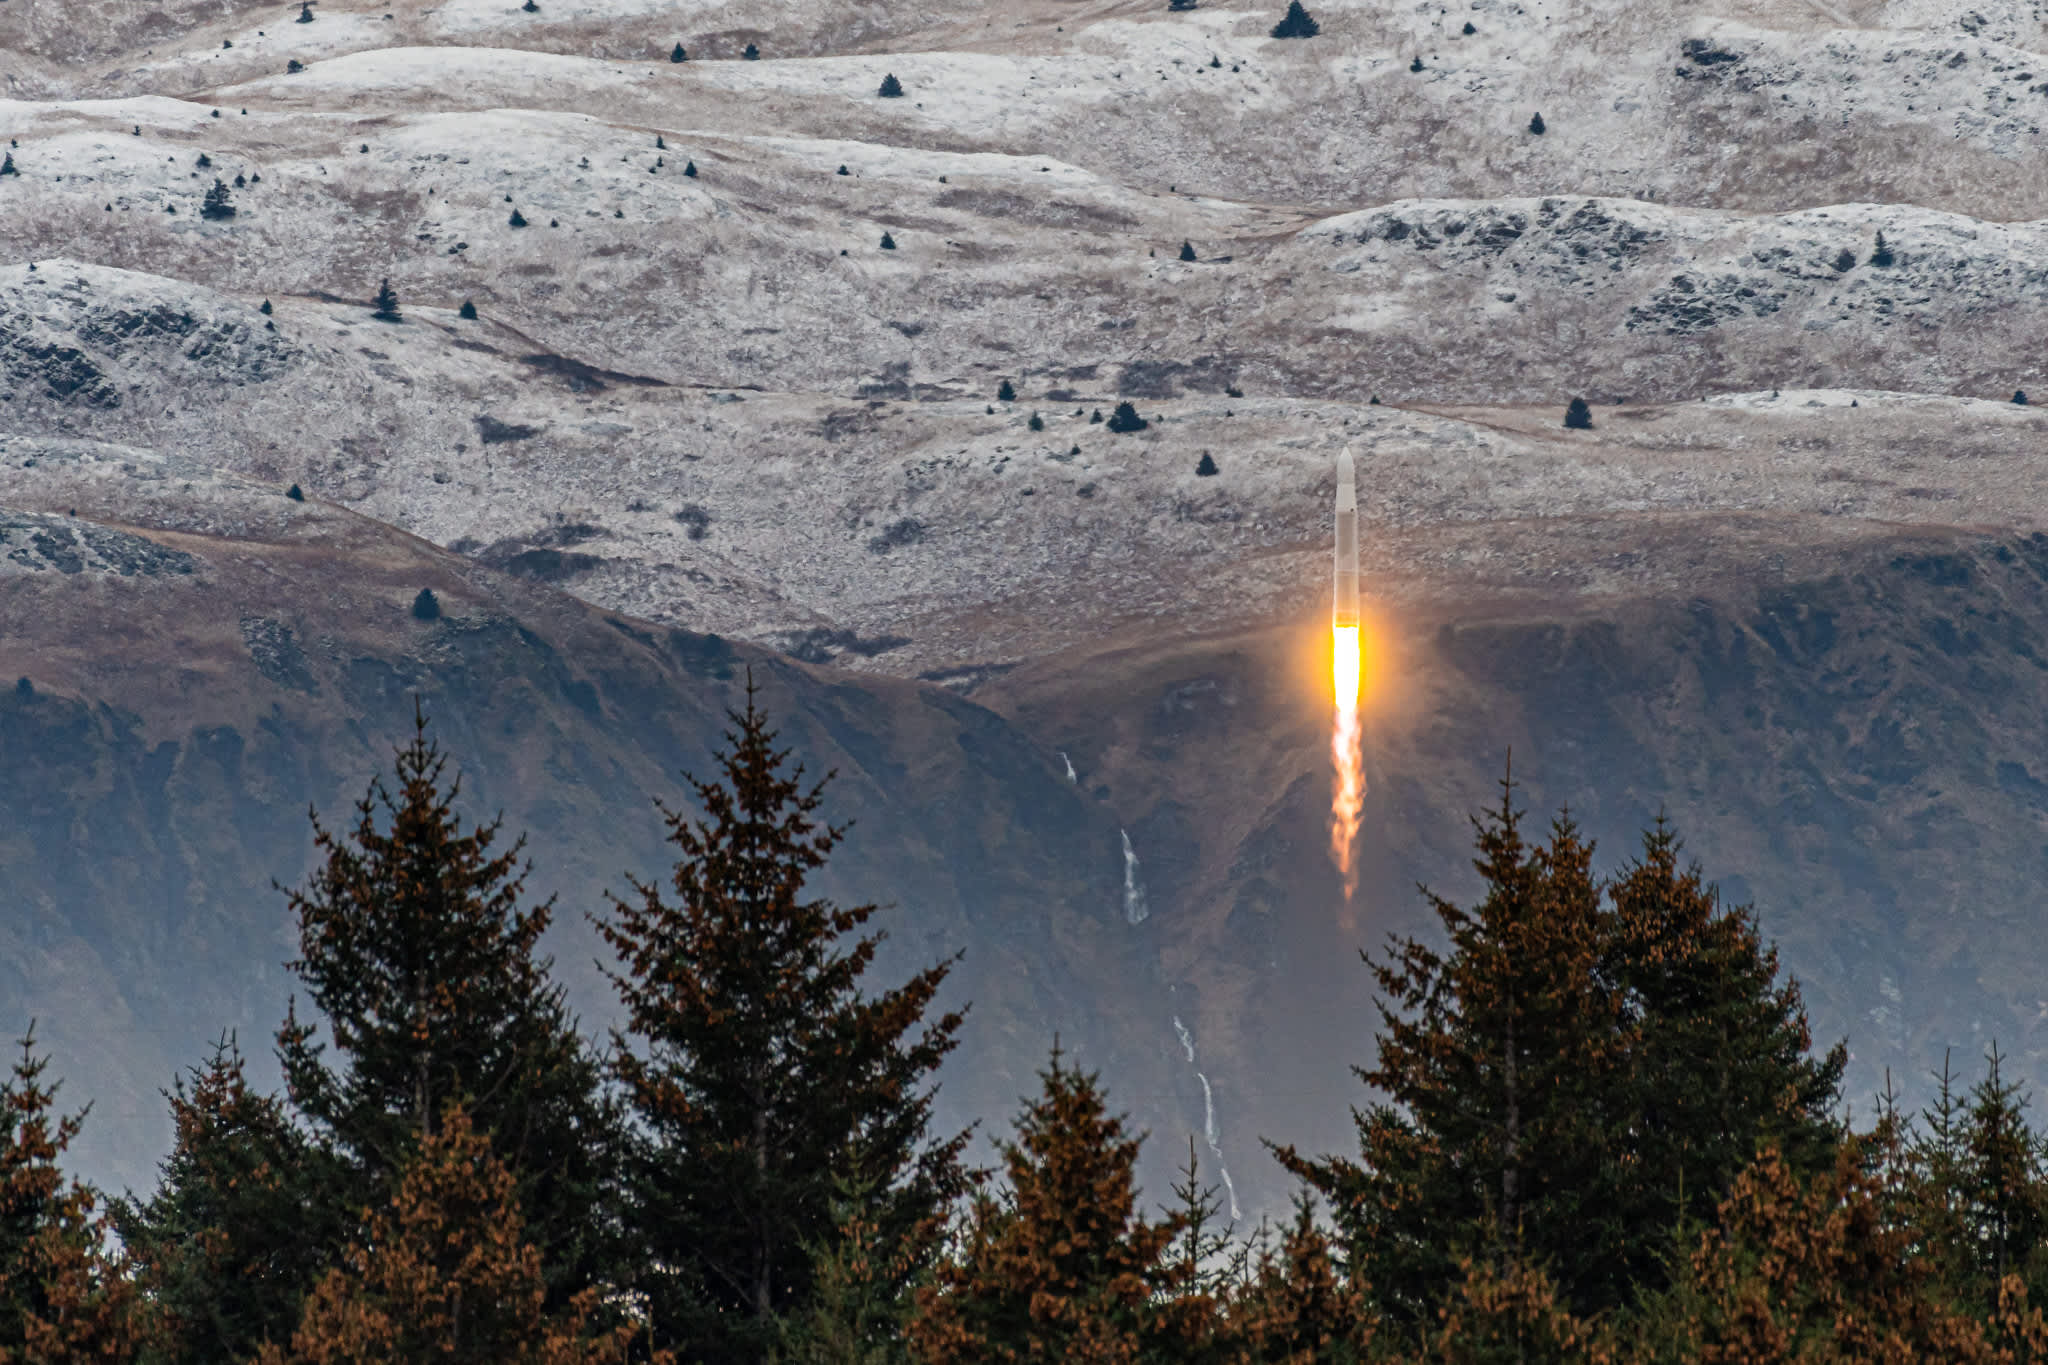 Astra Rocket 3.2 reaches house after launch from Alaska